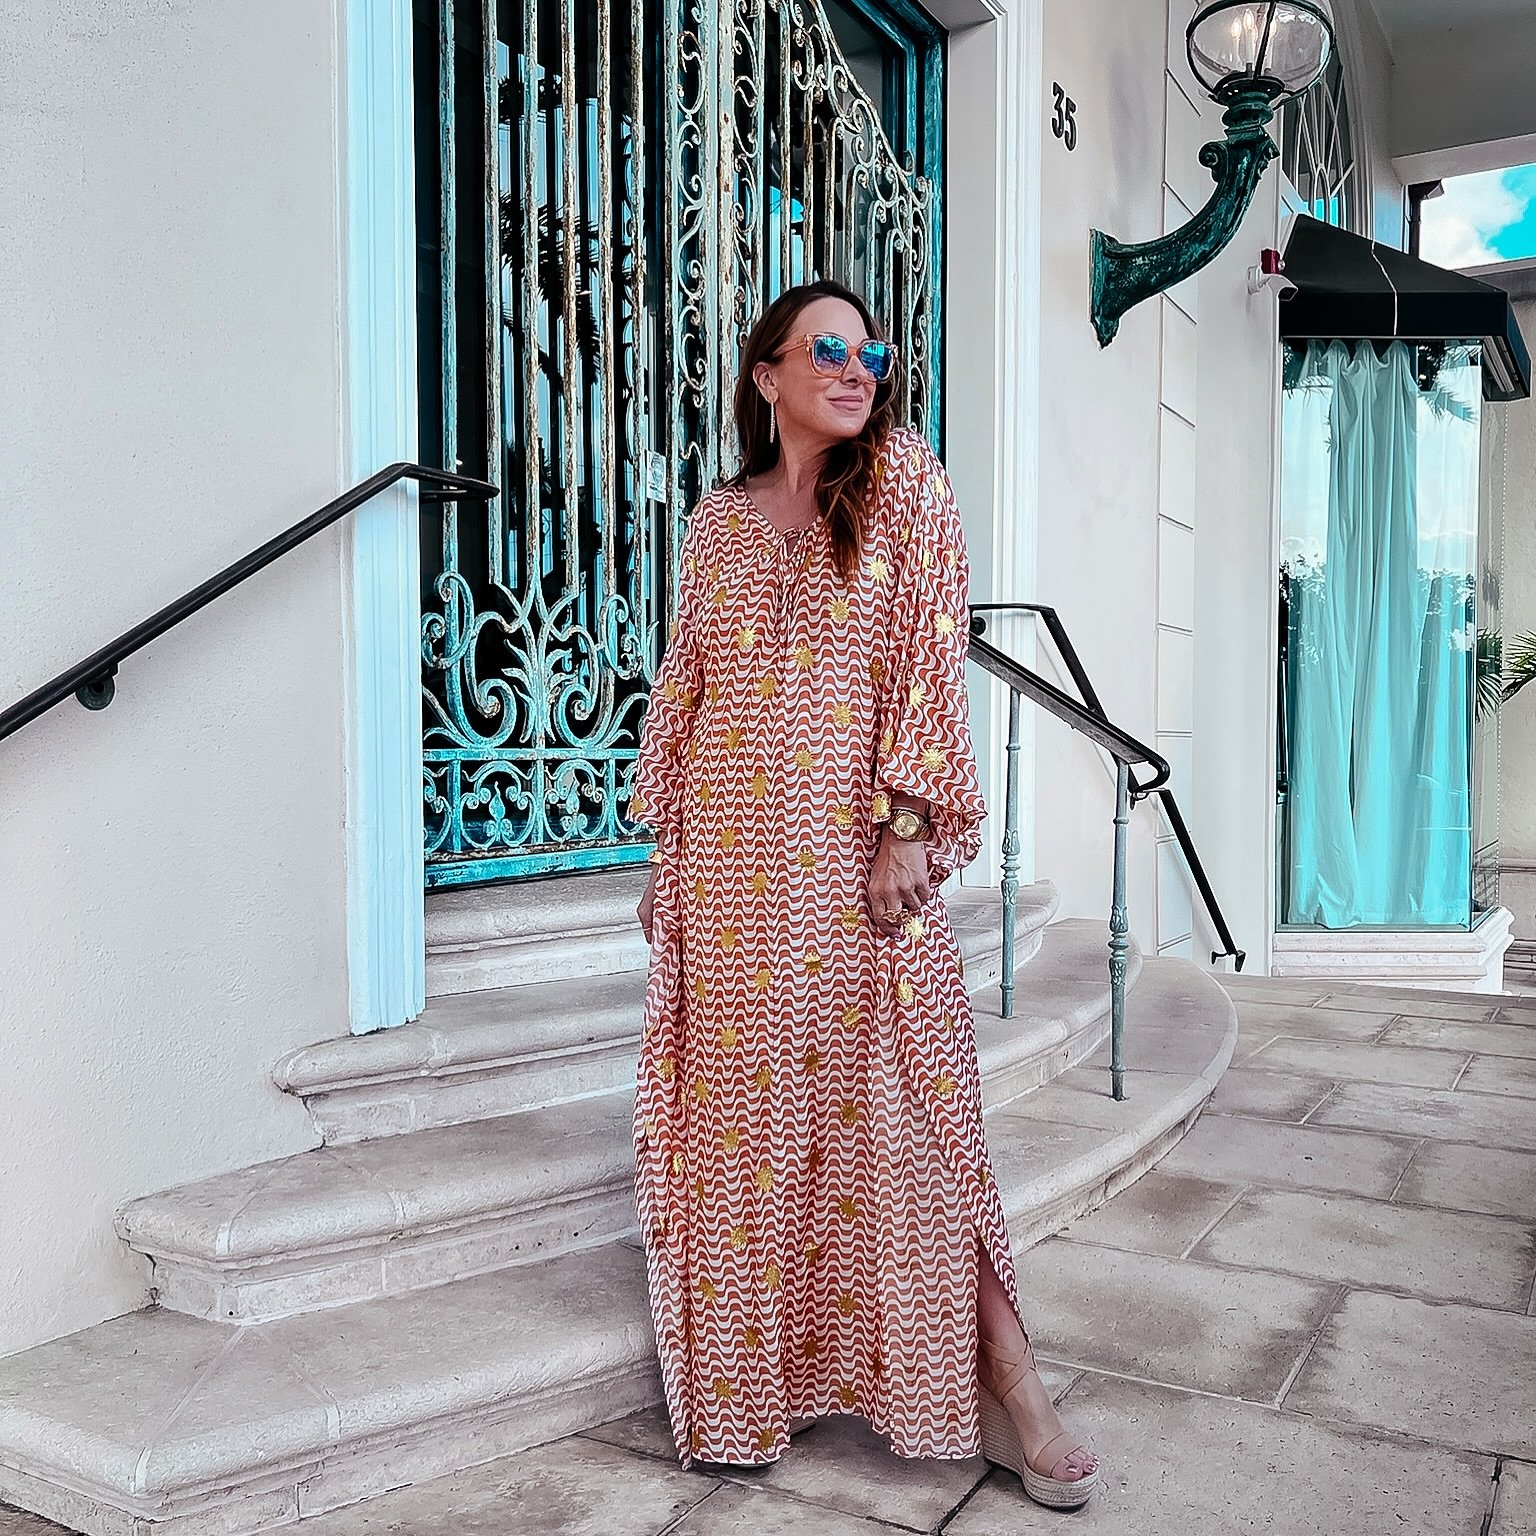 Dresses are a summer Staple. They are the thing we all live in because they are easy and usually cool. I am sharing some of my favorite summer dress finds today as well as one of my new faves I purchased in Palm Springs when I was there a couple mont